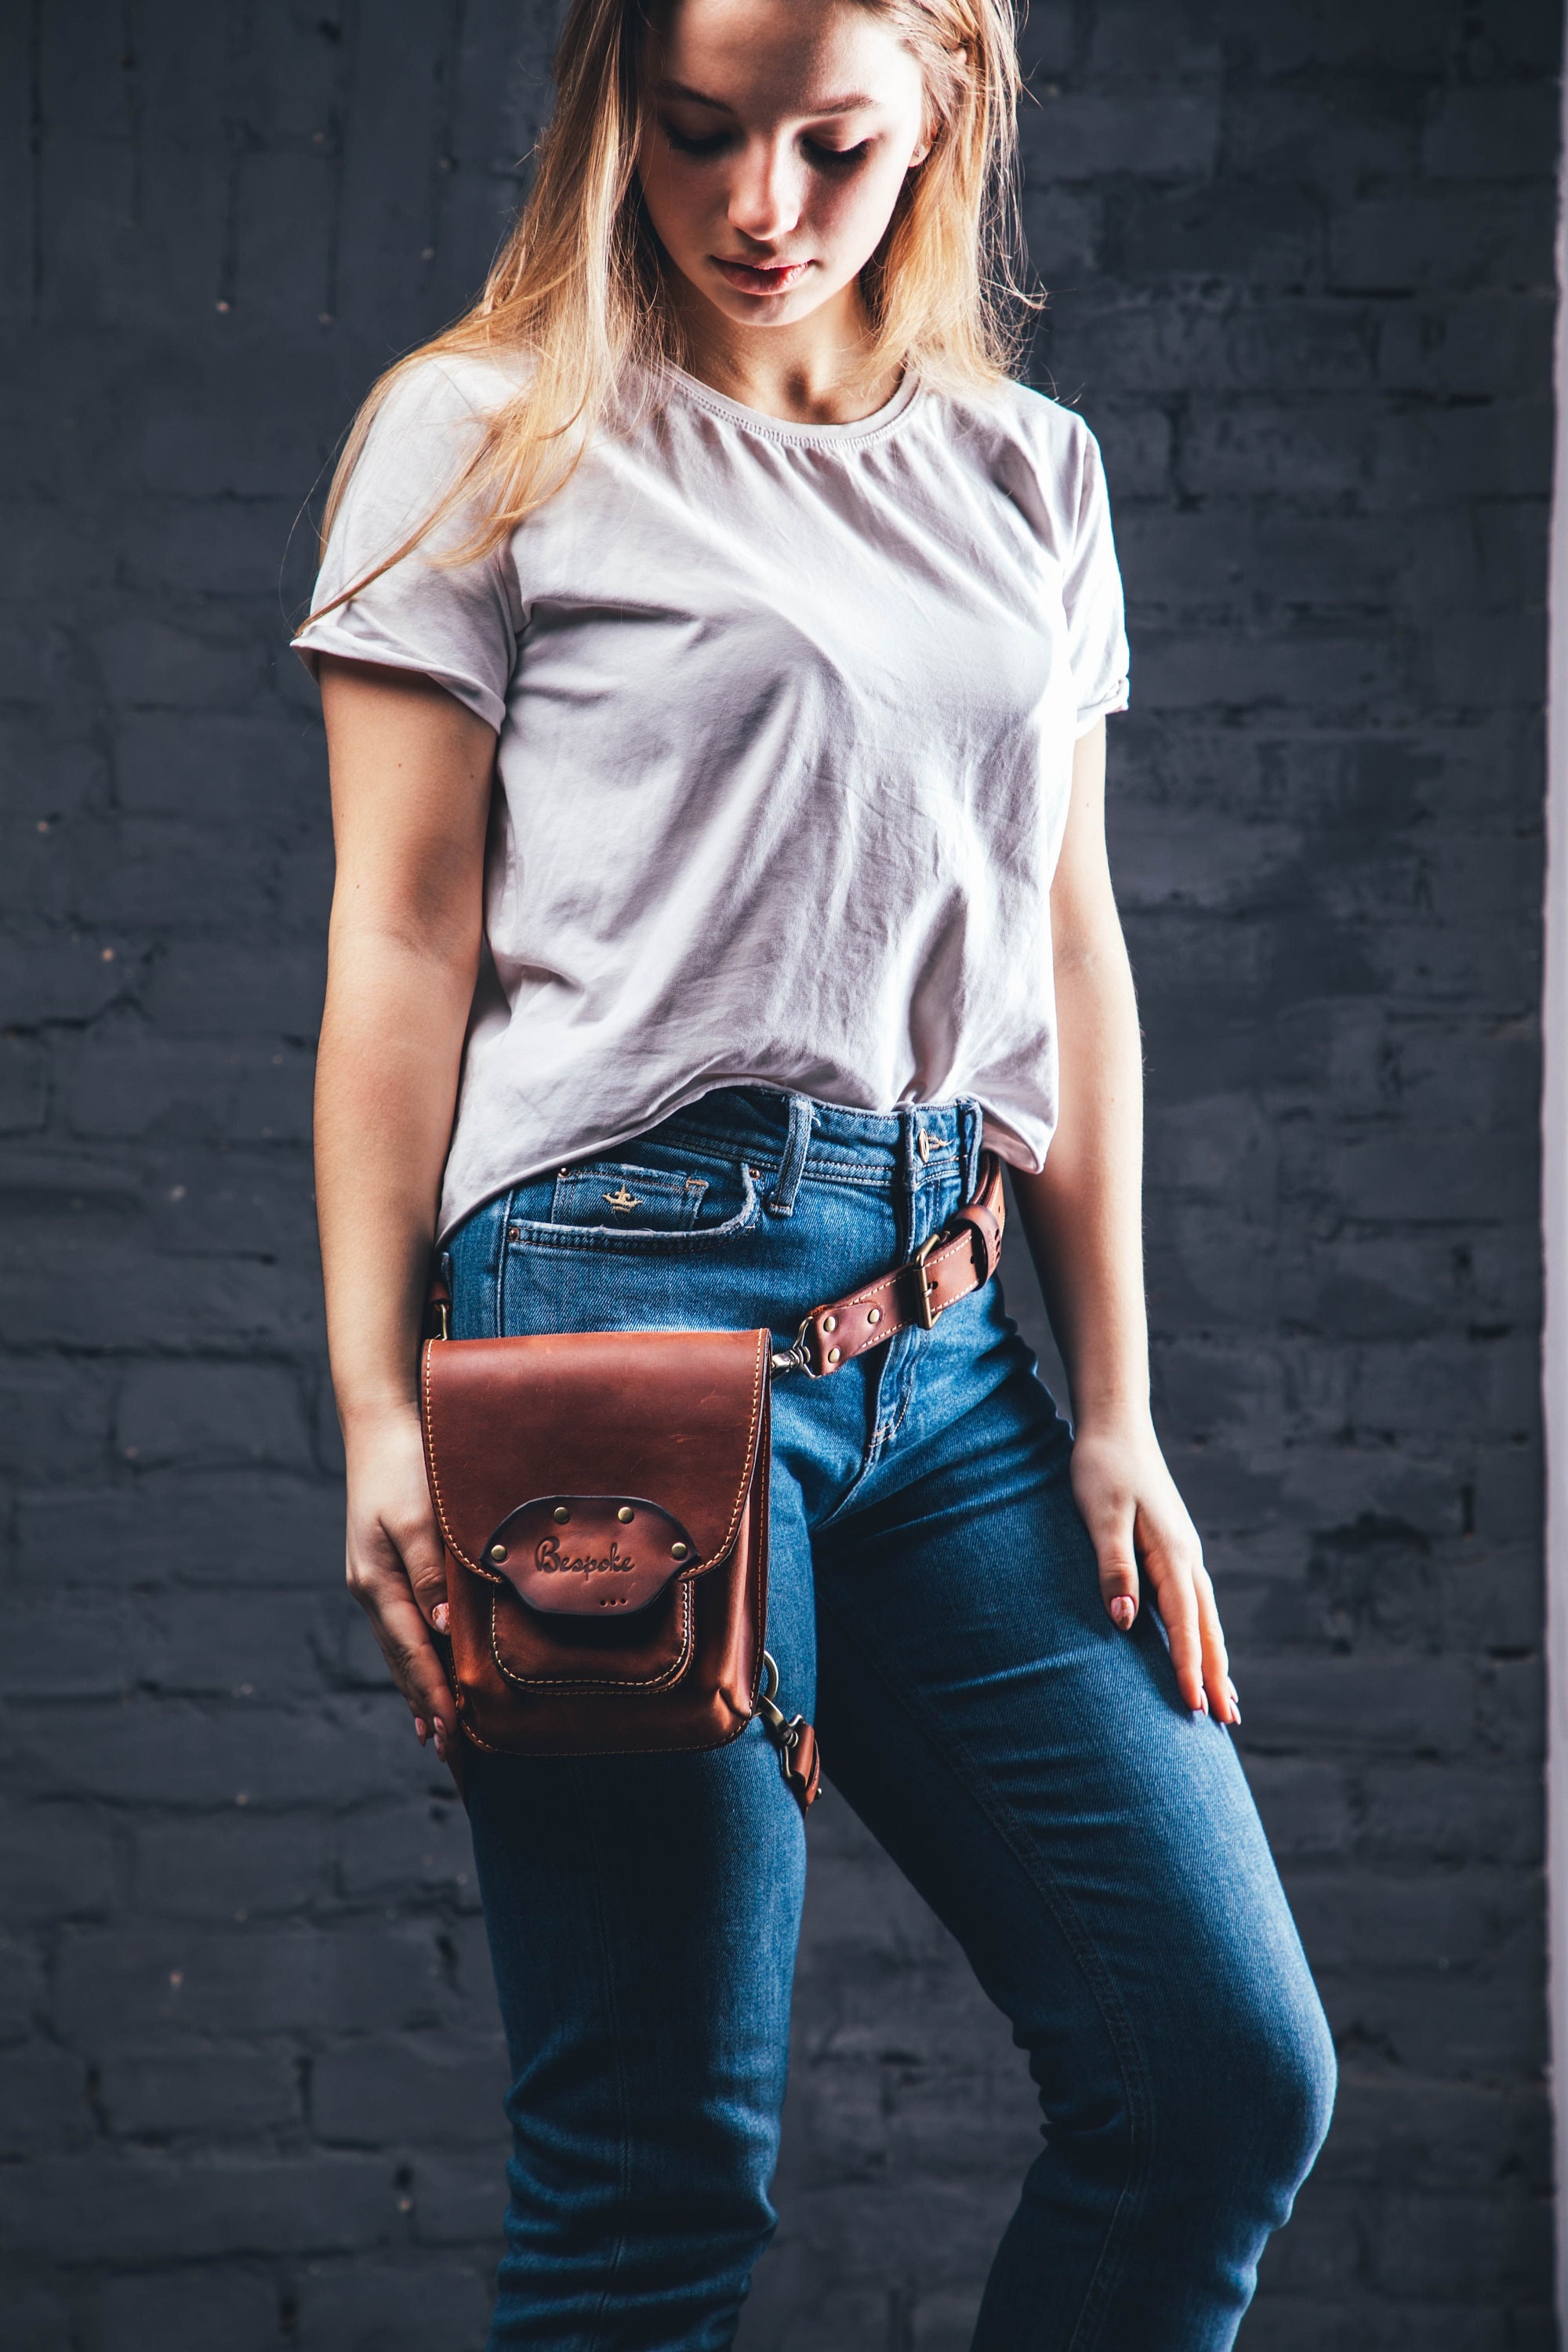 leather hip bag with leg strap